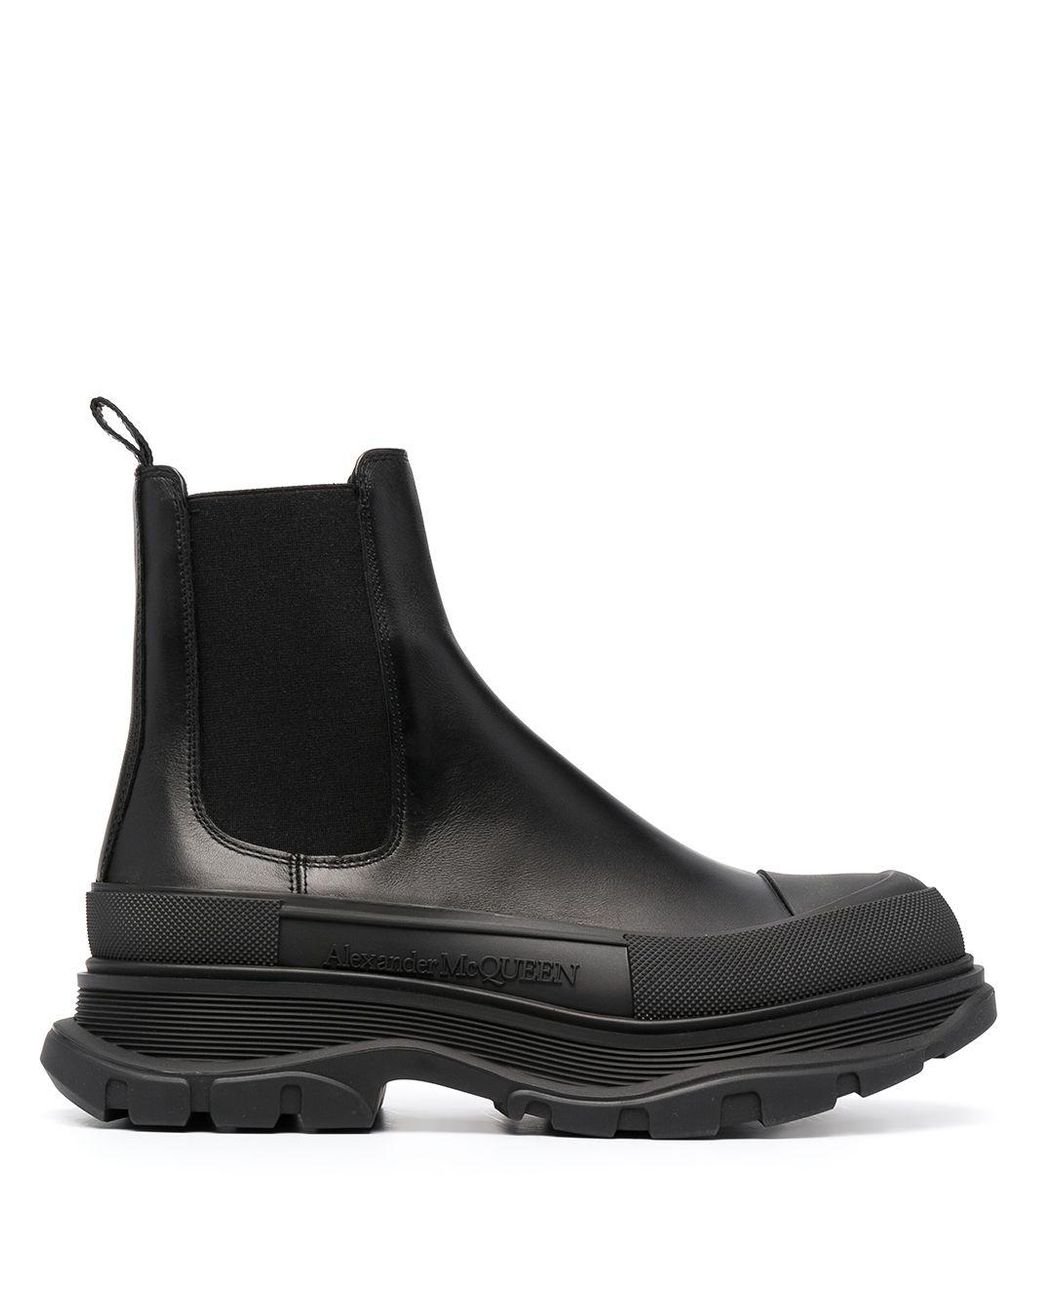 Alexander McQueen Chunky Sole Chelsea Boots in Black for Men - Lyst